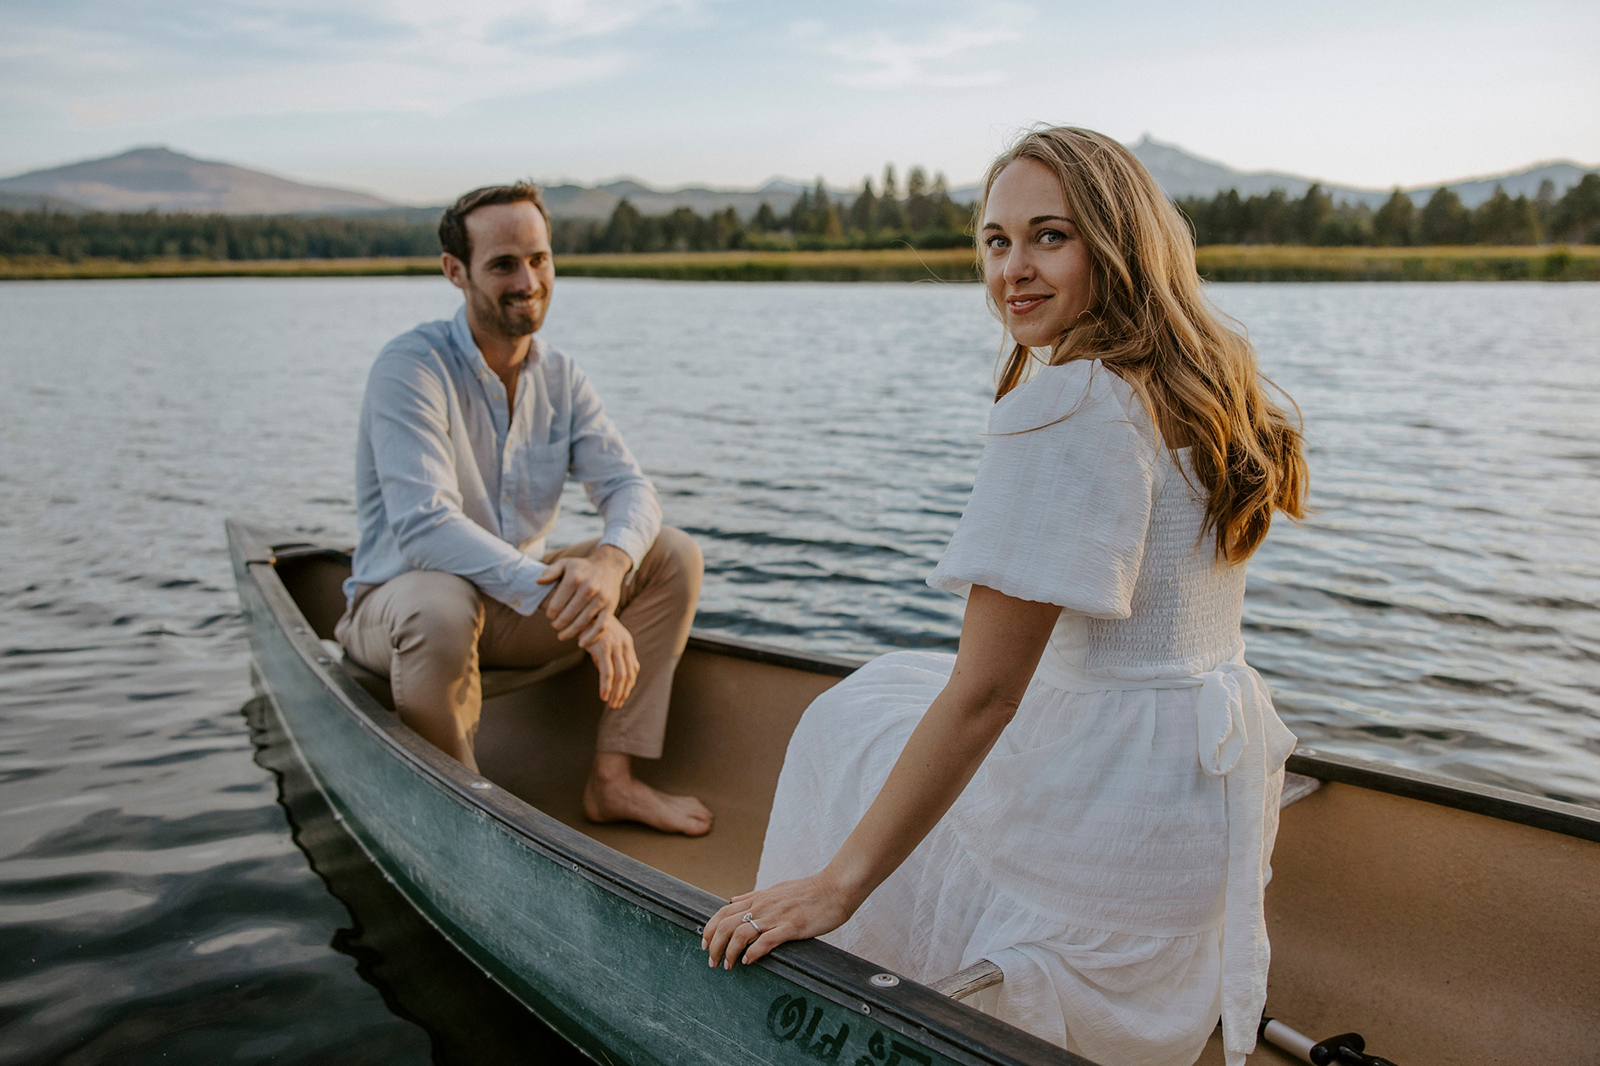 notebook style engagement shoot black butte ranch central oregon